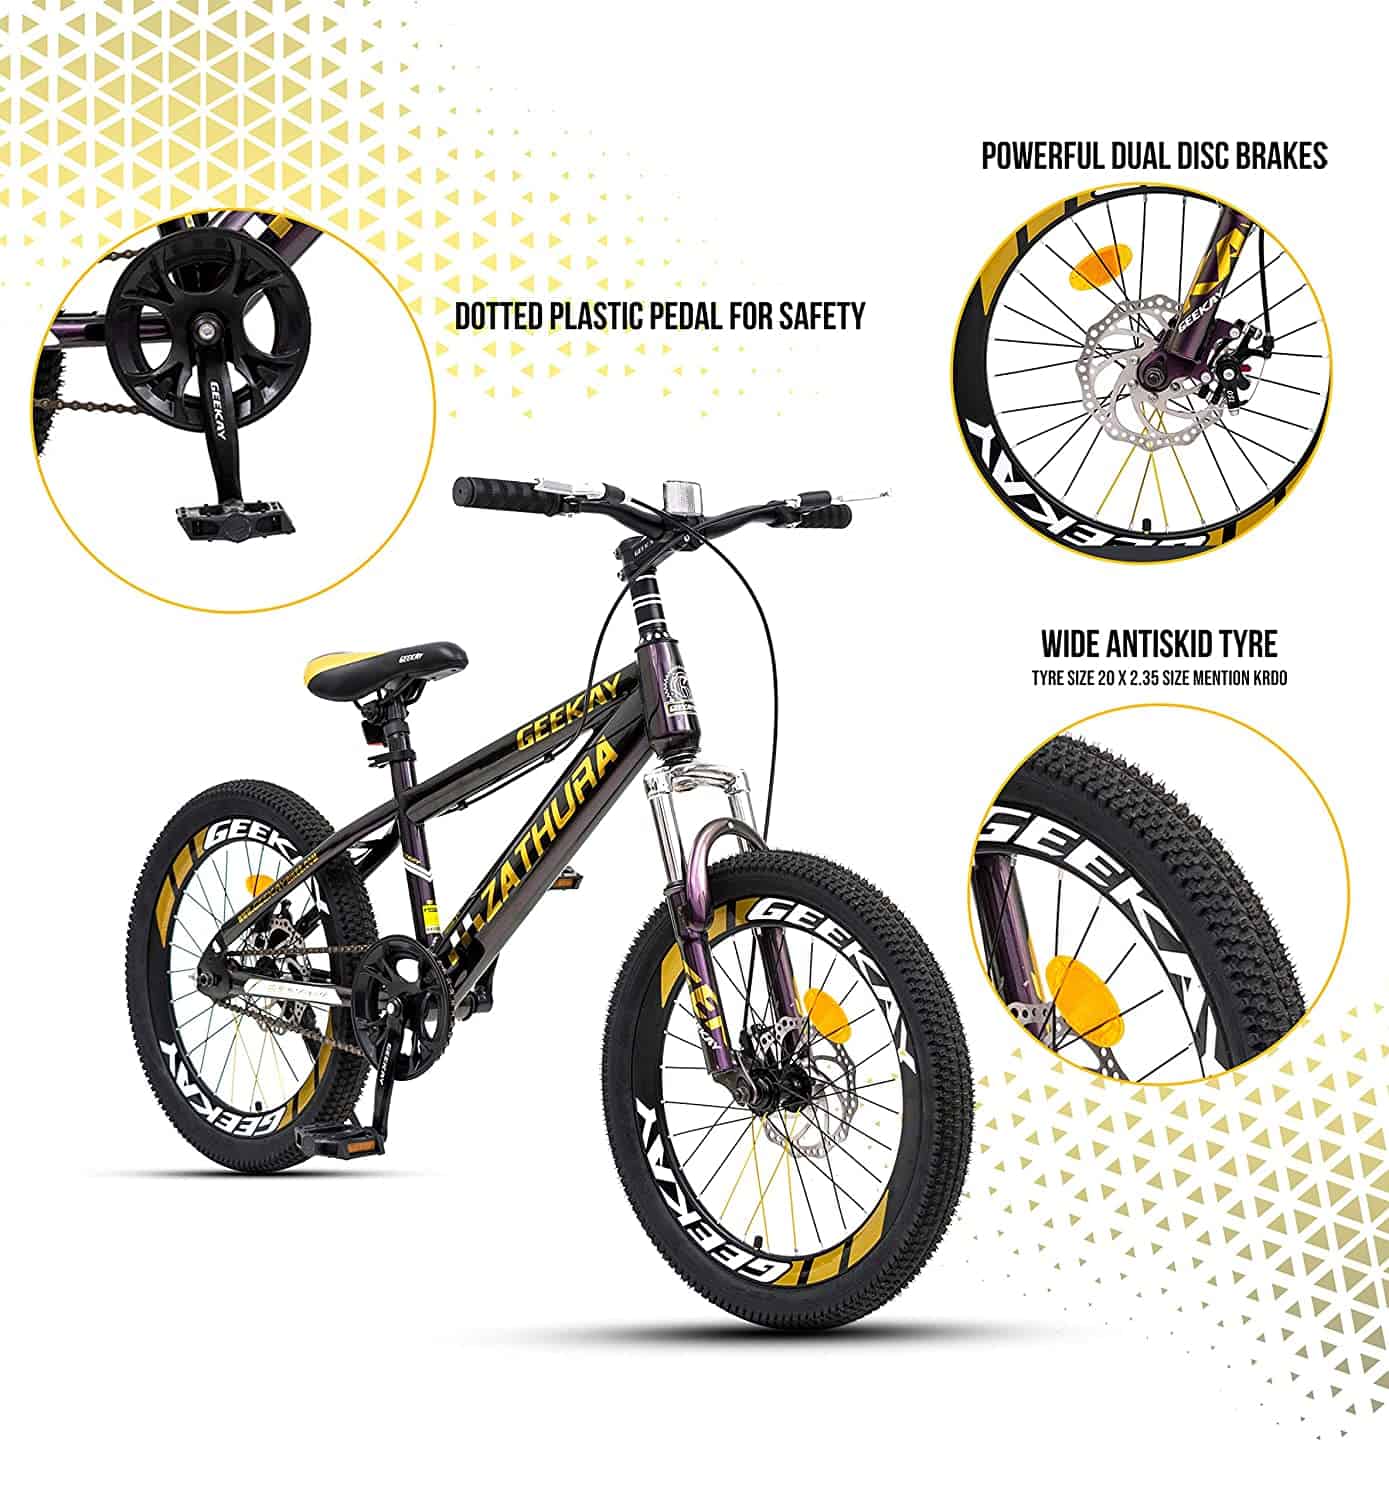 Geekay Kids Cycle 20 inch non gear wheel for boys girls Bicycle | Single Speed bmx kids mountain bike for 7 to 10 year | Ideal height 3'9" to 4'.3" kids | Latest 2 Tone Sparkle Color Finish 85% Fitted bike | Zathura 20" Unisex Cycle